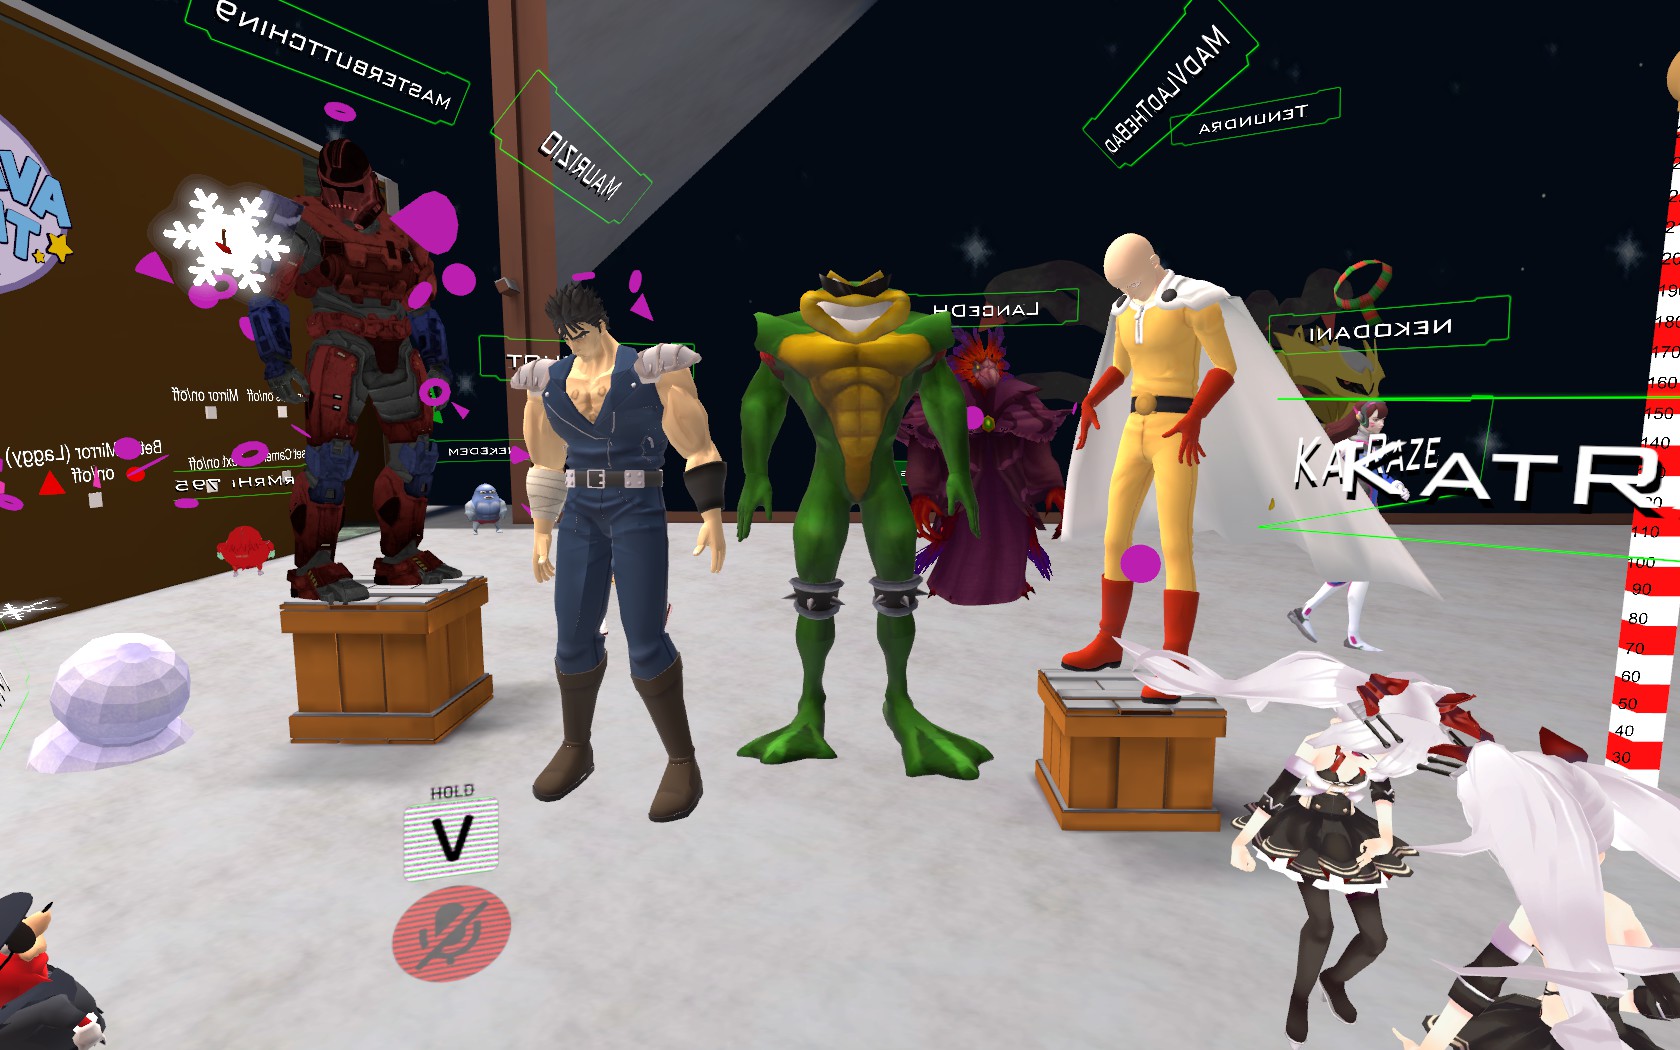 Steam Community Screenshot 3 Over Powerfull Characters In Vrchat